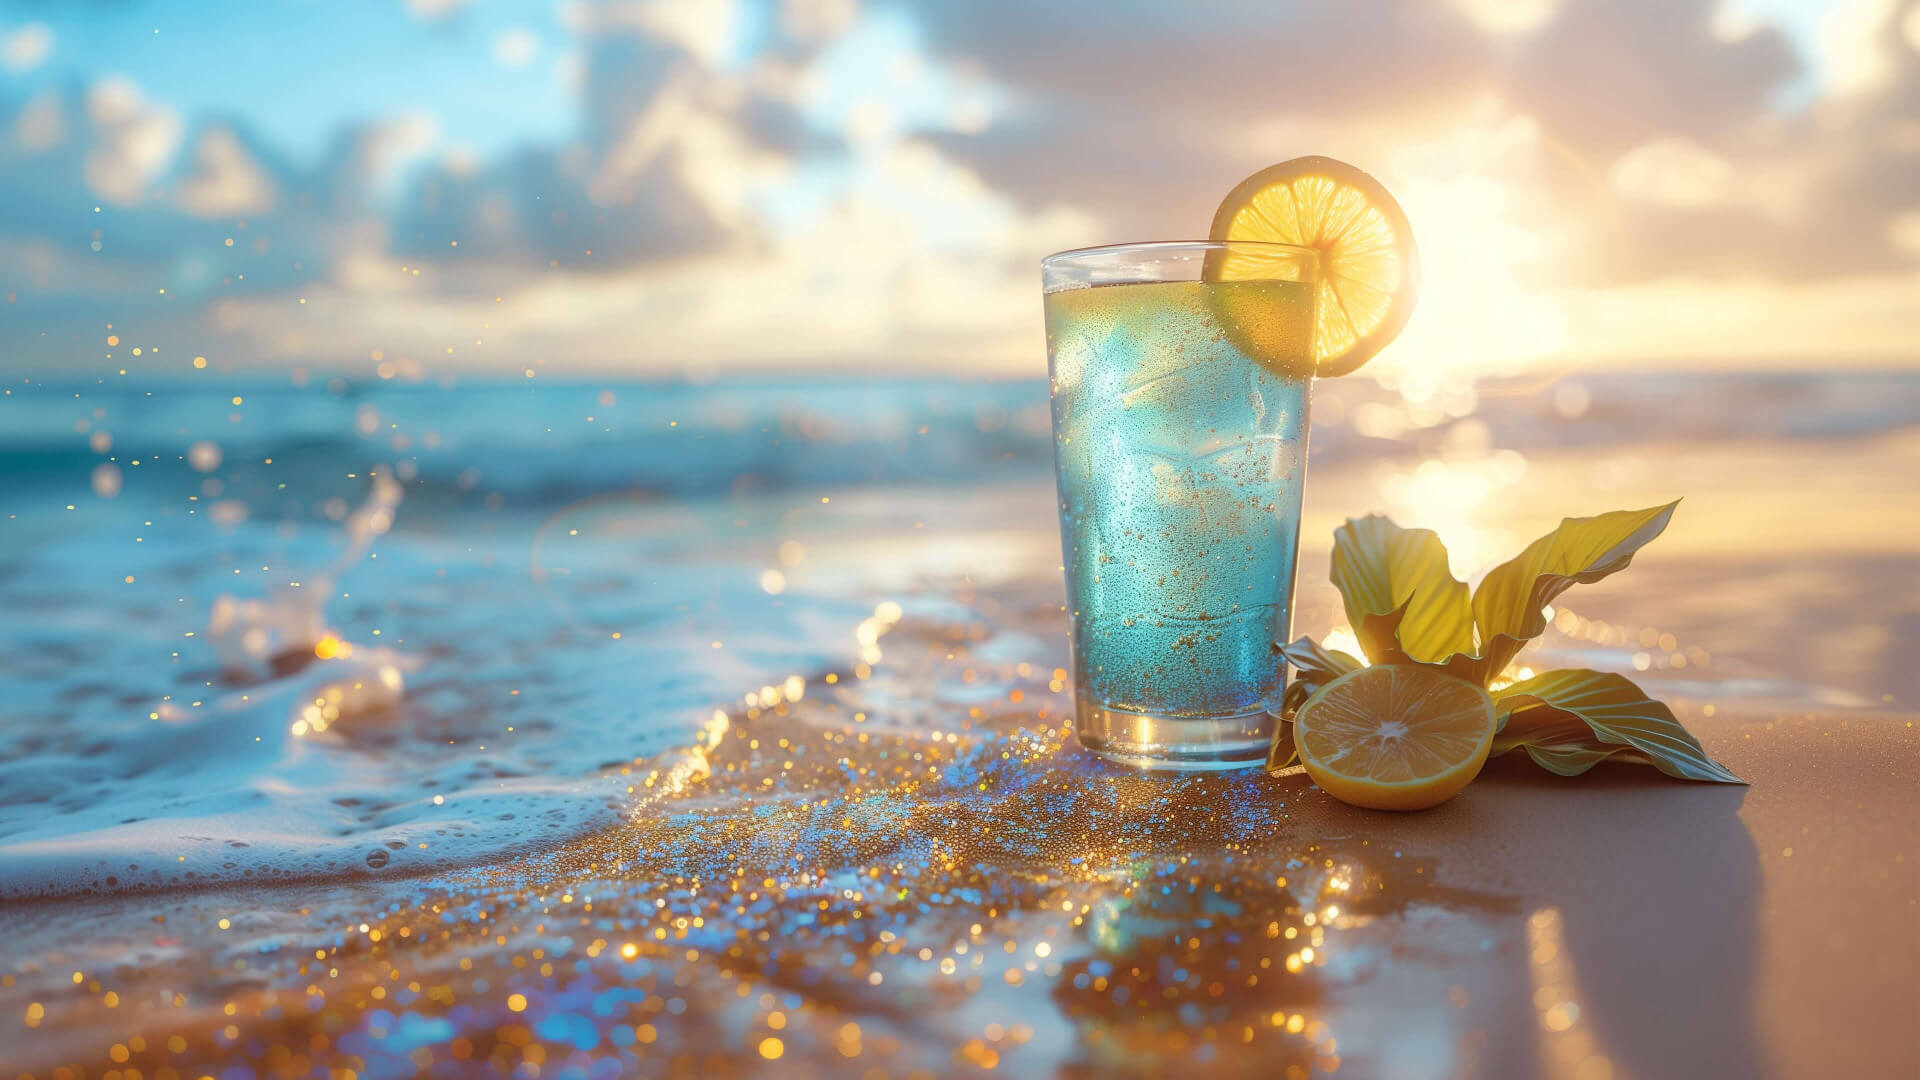 Cold drink on the ocean shore wallpaper 1920x1080